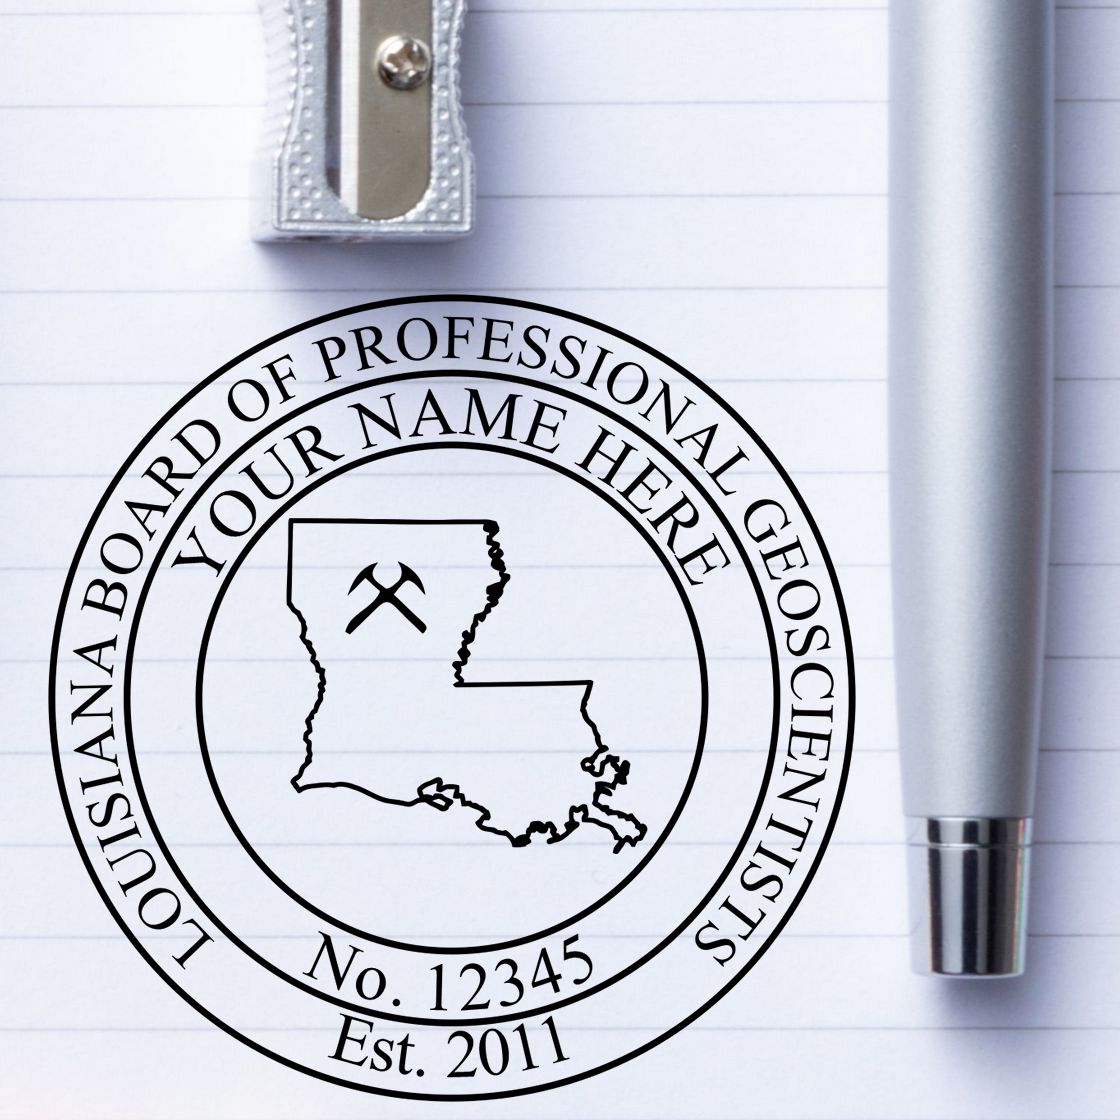 The Louisiana Professional Geologist Seal Stamp stamp impression comes to life with a crisp, detailed image stamped on paper - showcasing true professional quality.